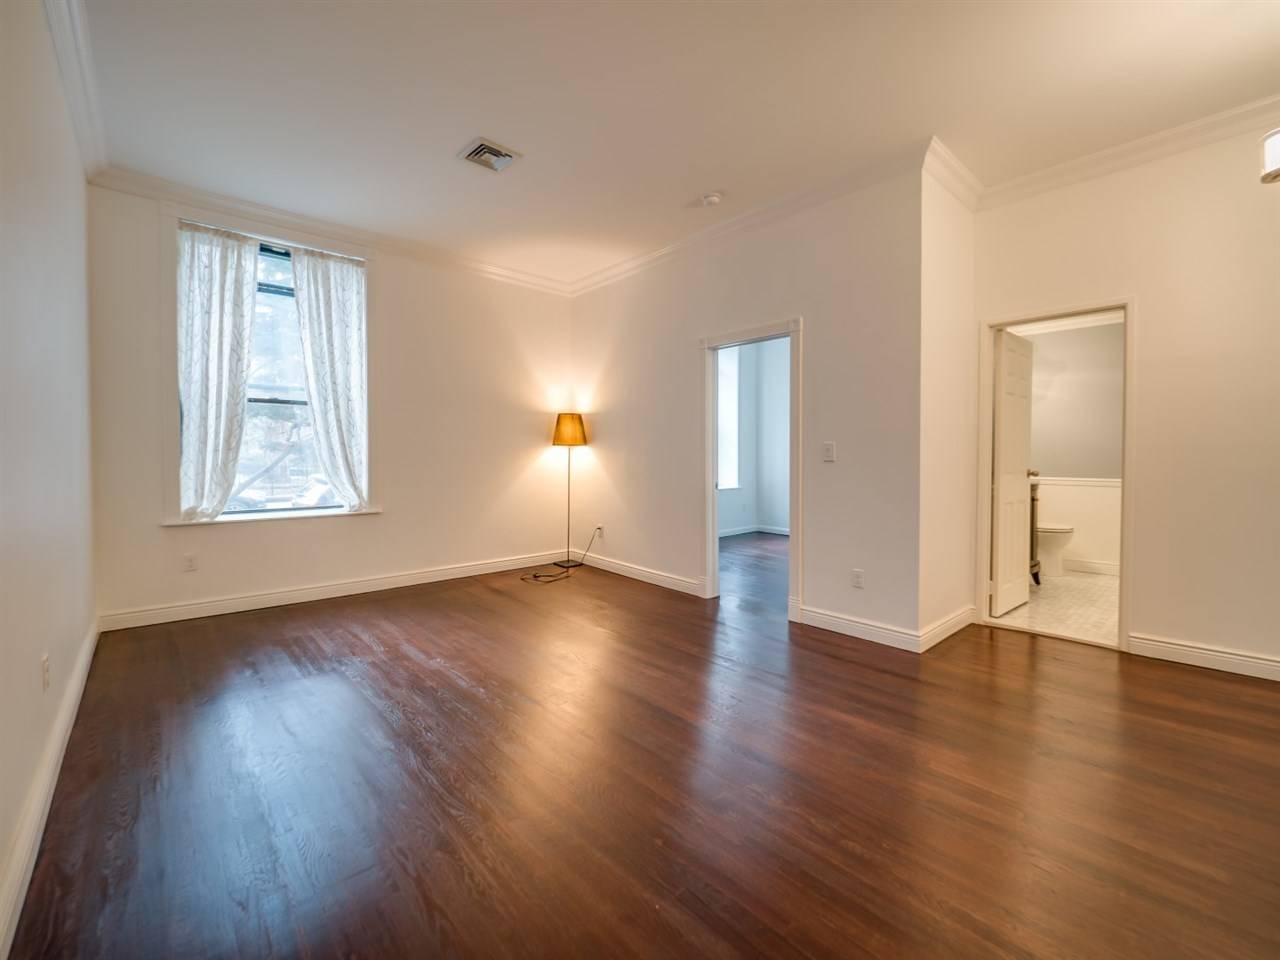 Welcome to this recently renovated - 2 BR New Jersey